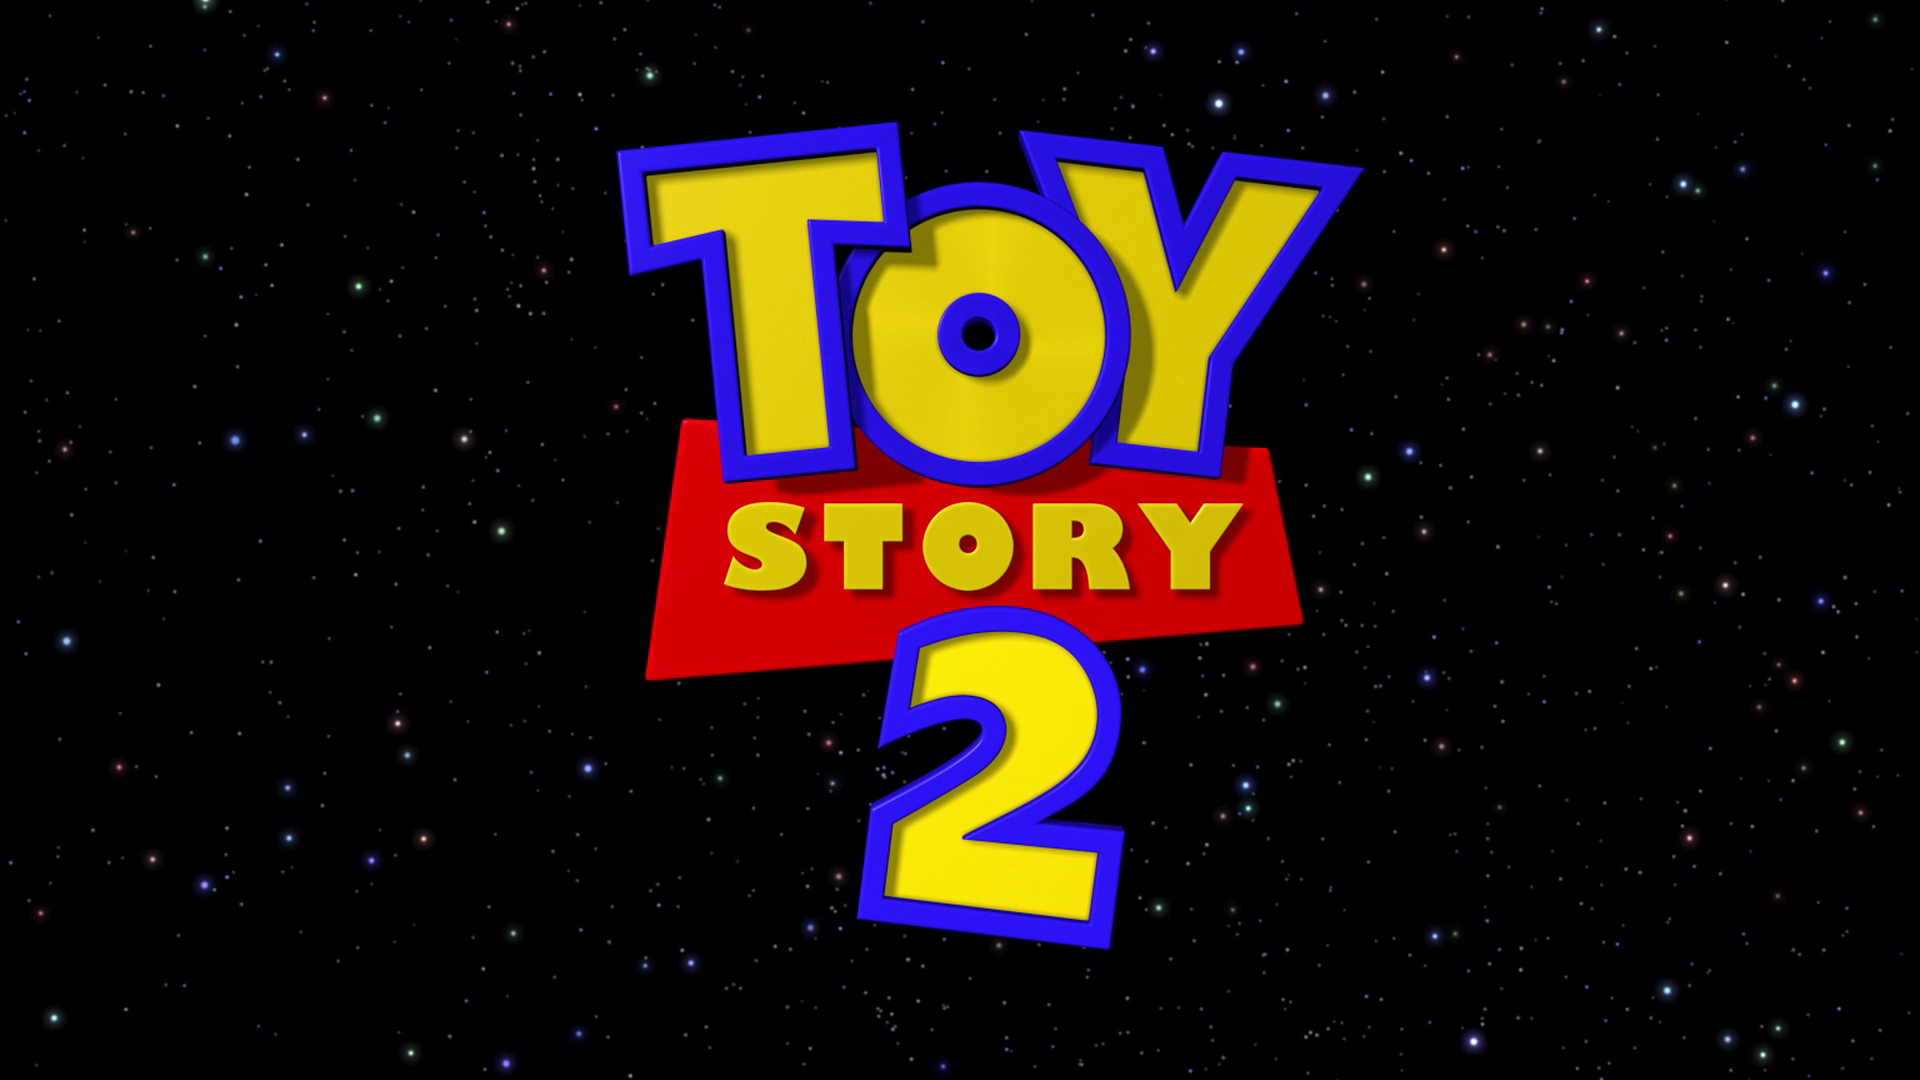 Toy Story 3 download the new